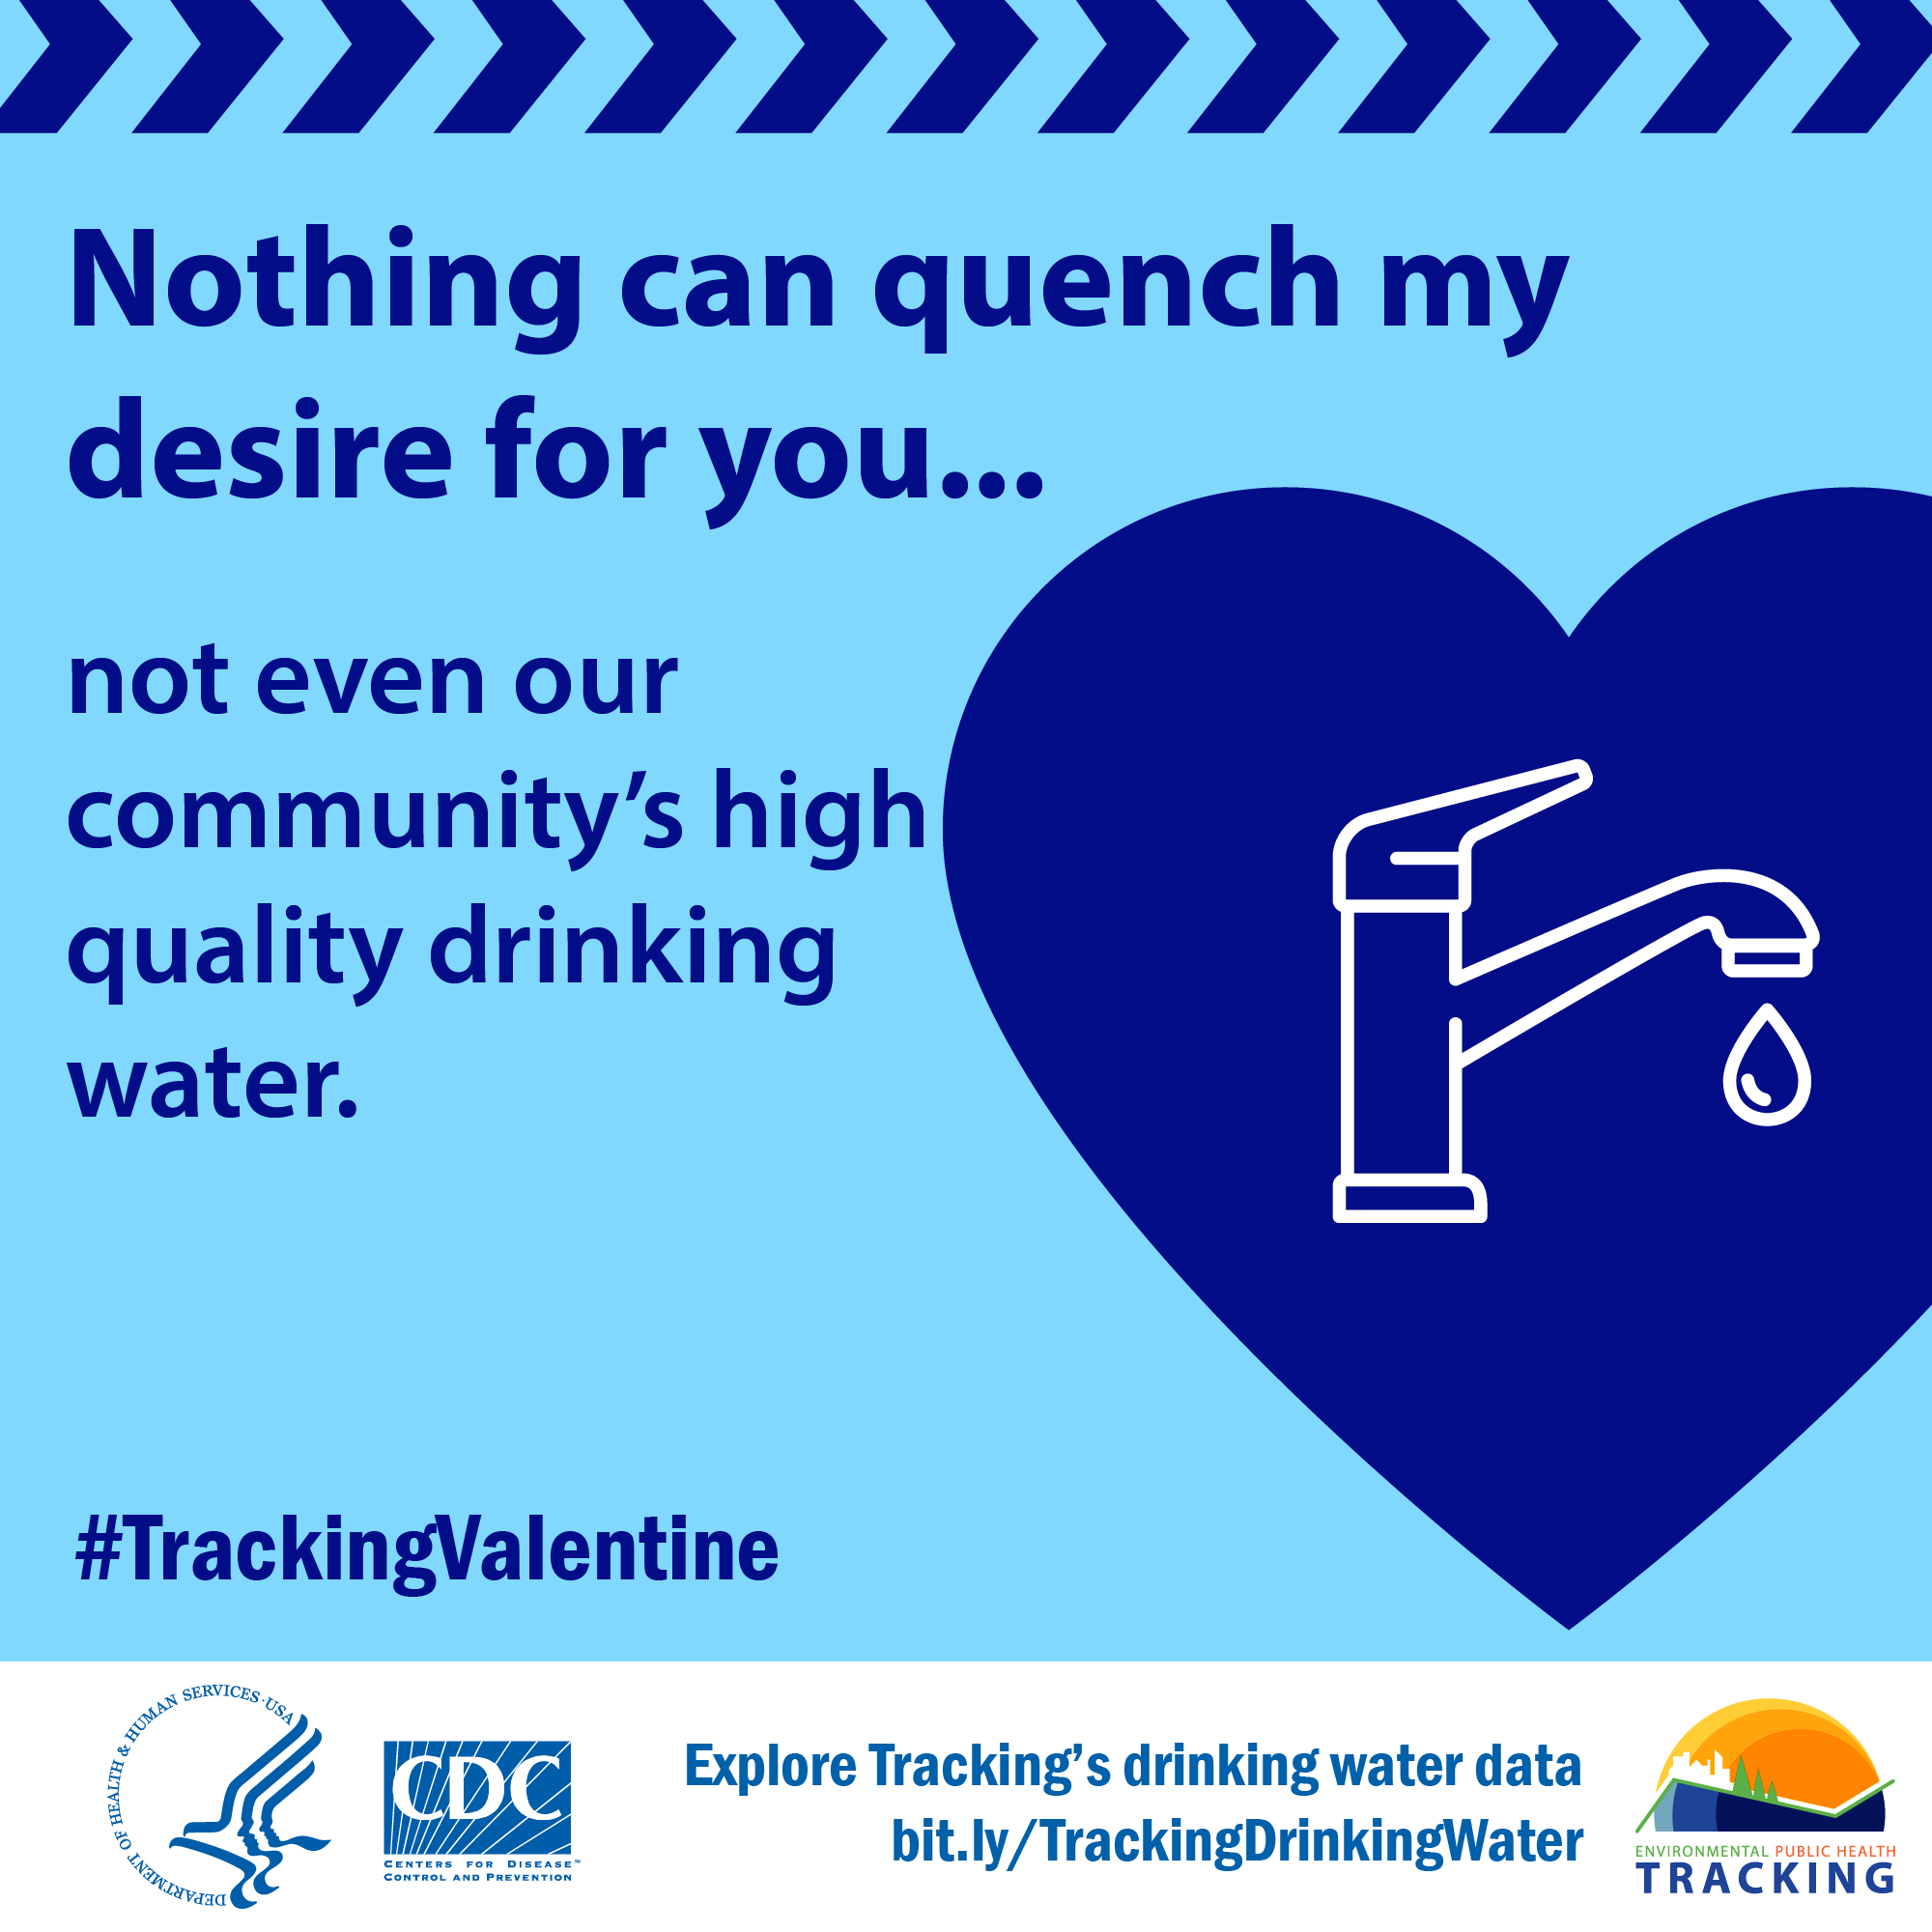 water faucet icon inside decorative blue heart with text: "Nothing can quench my desire for you...not even our community's high quality drinking water. #TrackingValentine."